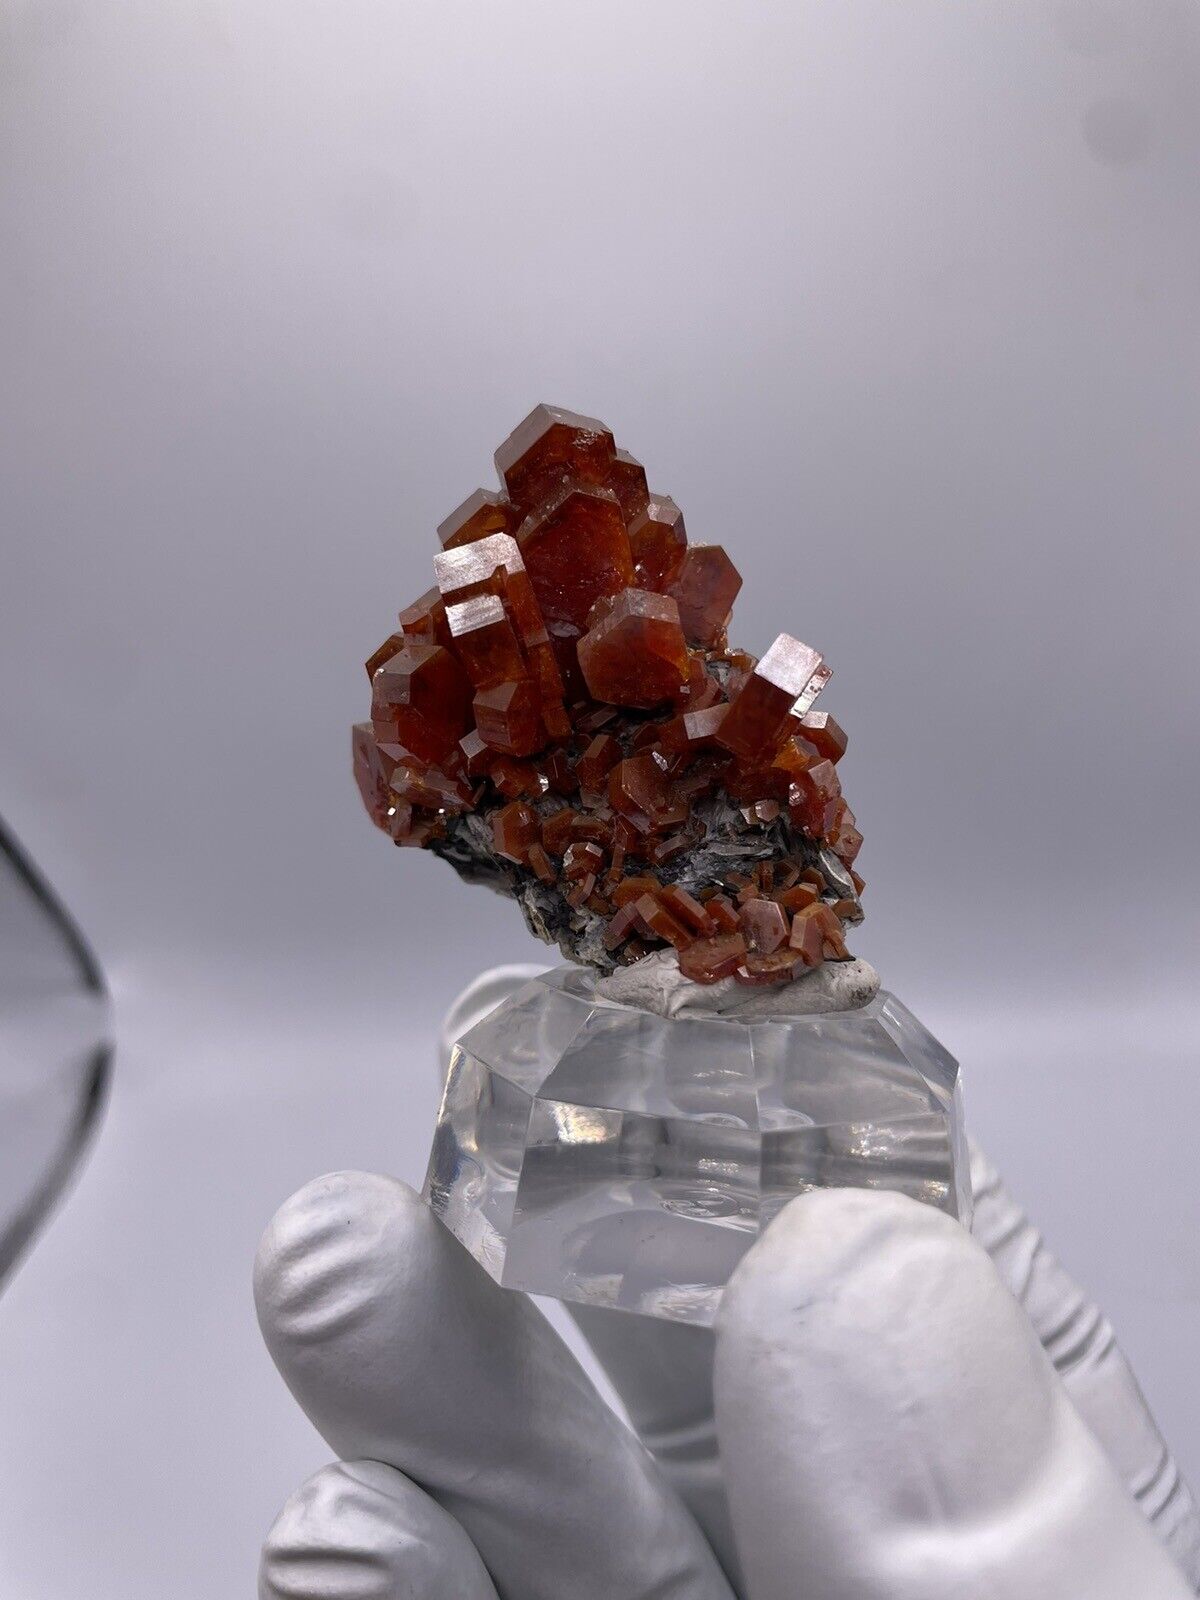 66.9g Unique Deep Red Lustrous Vanadinite Crystal Cluster From Mibladen Morocco